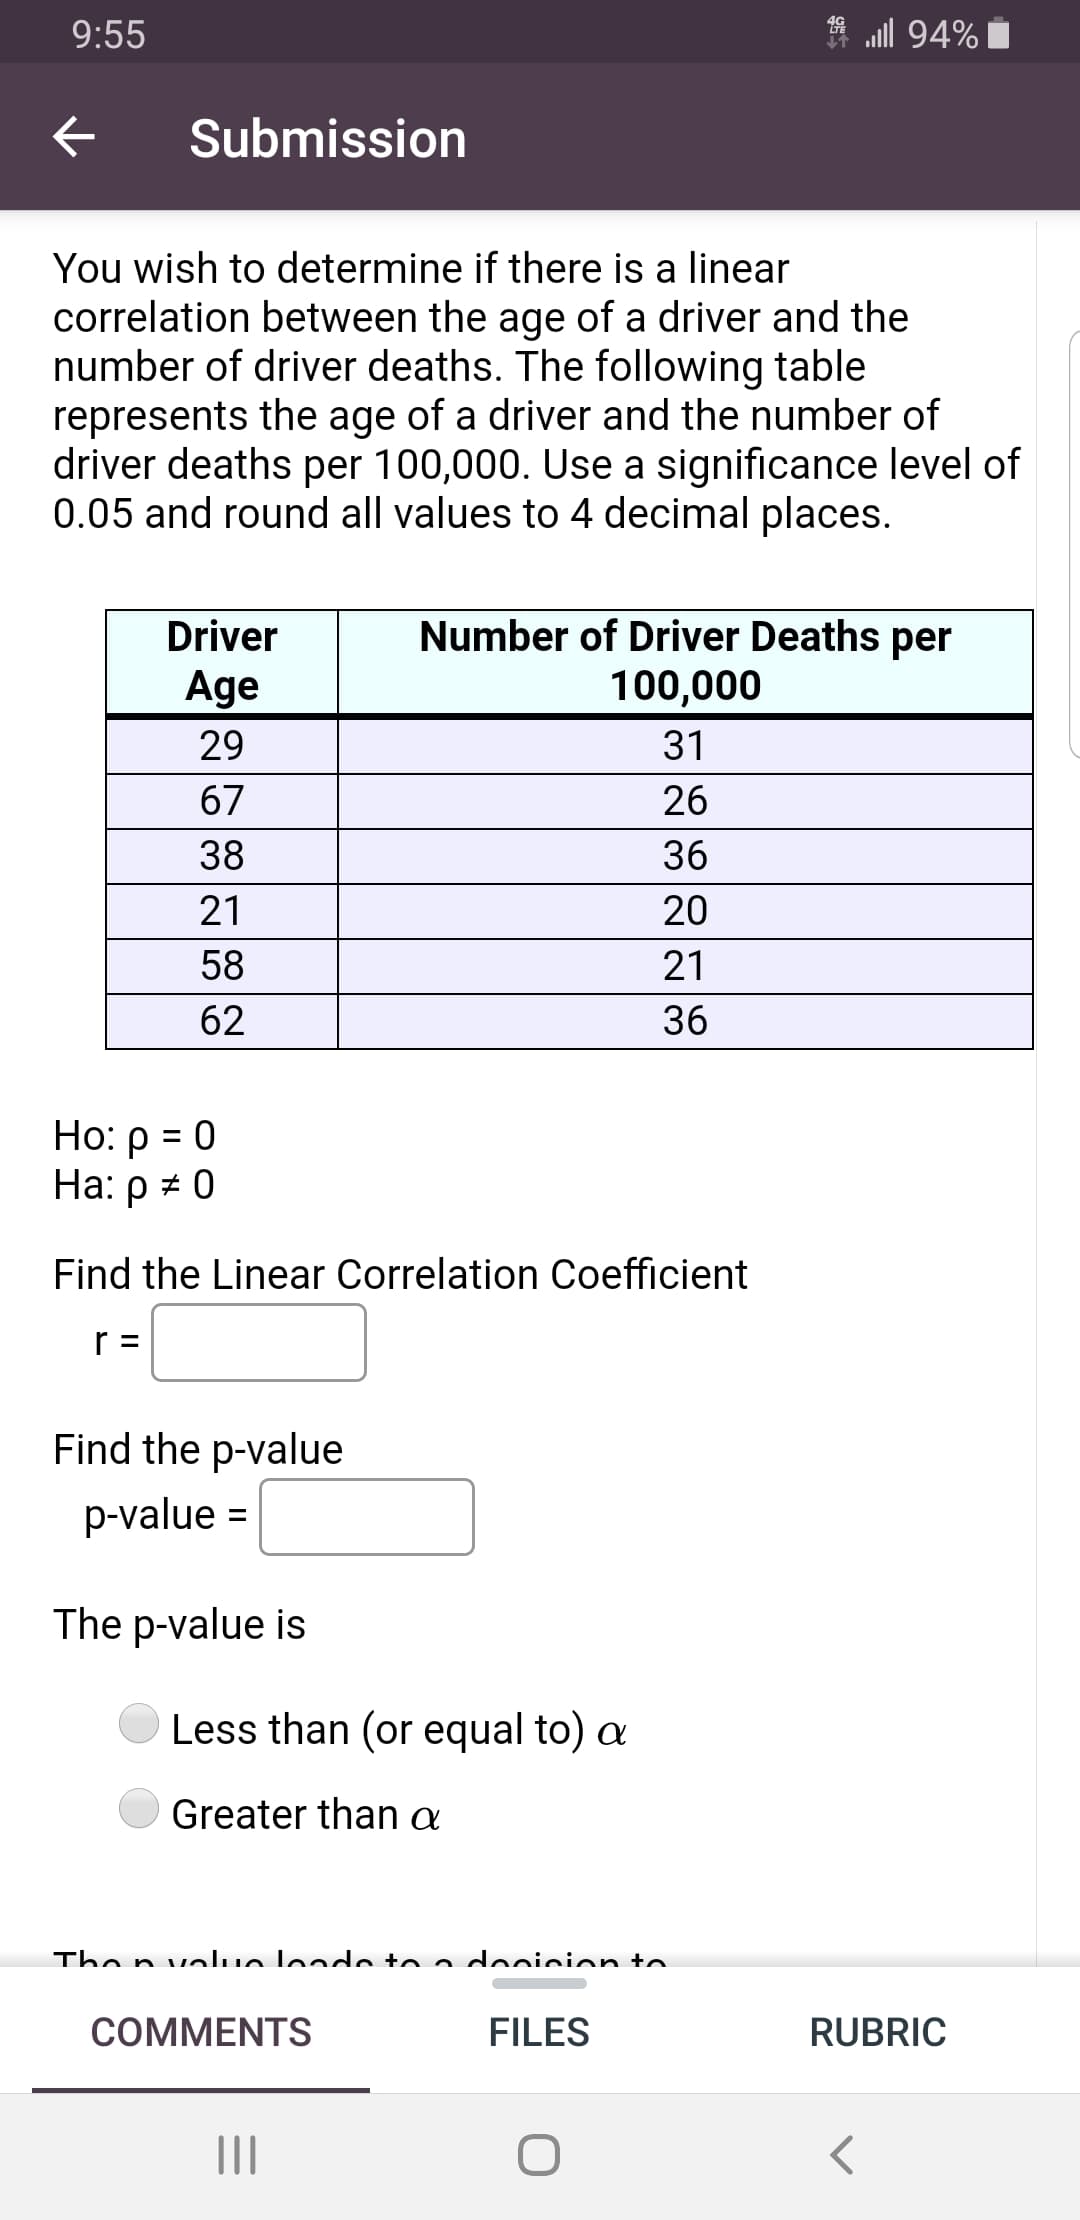 You wish to determine if there is a linear
correlation between the age of a driver and the
number of driver deaths. The following table
represents the age of a driver and the number of
driver deaths per 100,000. Use a significance level of
0.05 and round all values to 4 decimal places.
Number of Driver Deaths per
100,000
Driver
Age
29
31
67
26
38
36
21
20
58
21
62
36
Ho: p = 0
На: р # 0
%3D
Find the Linear Correlation Coefficient
Find the p-value
p-value
